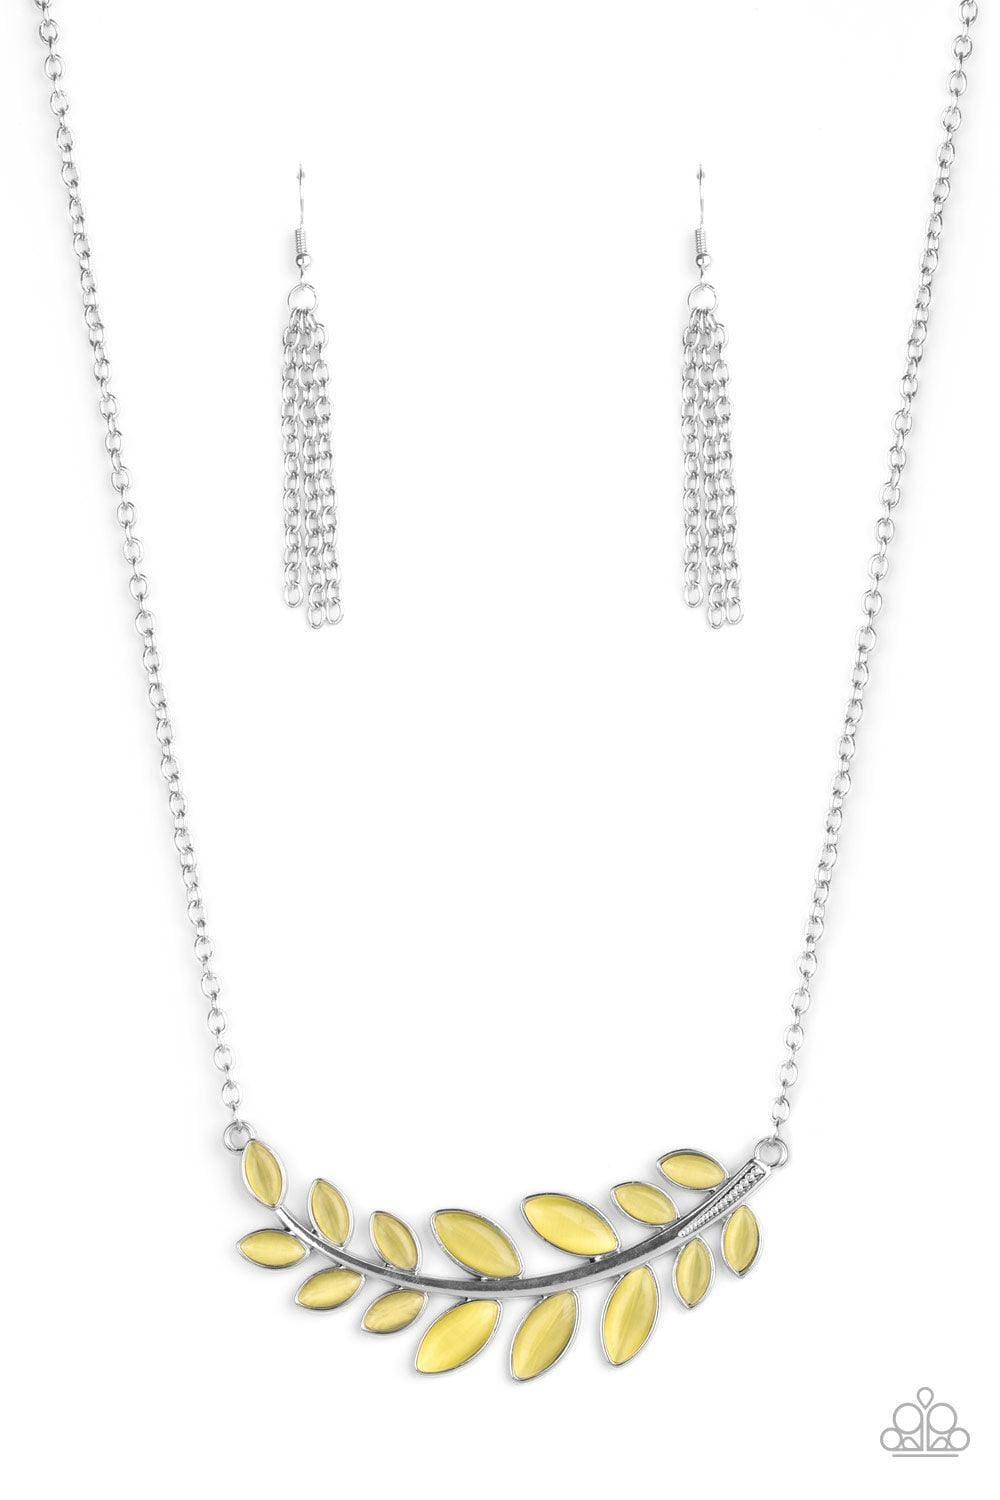 Paparazzi Accessories - Frosted Foliage - Yellow Necklace - Bling by JessieK